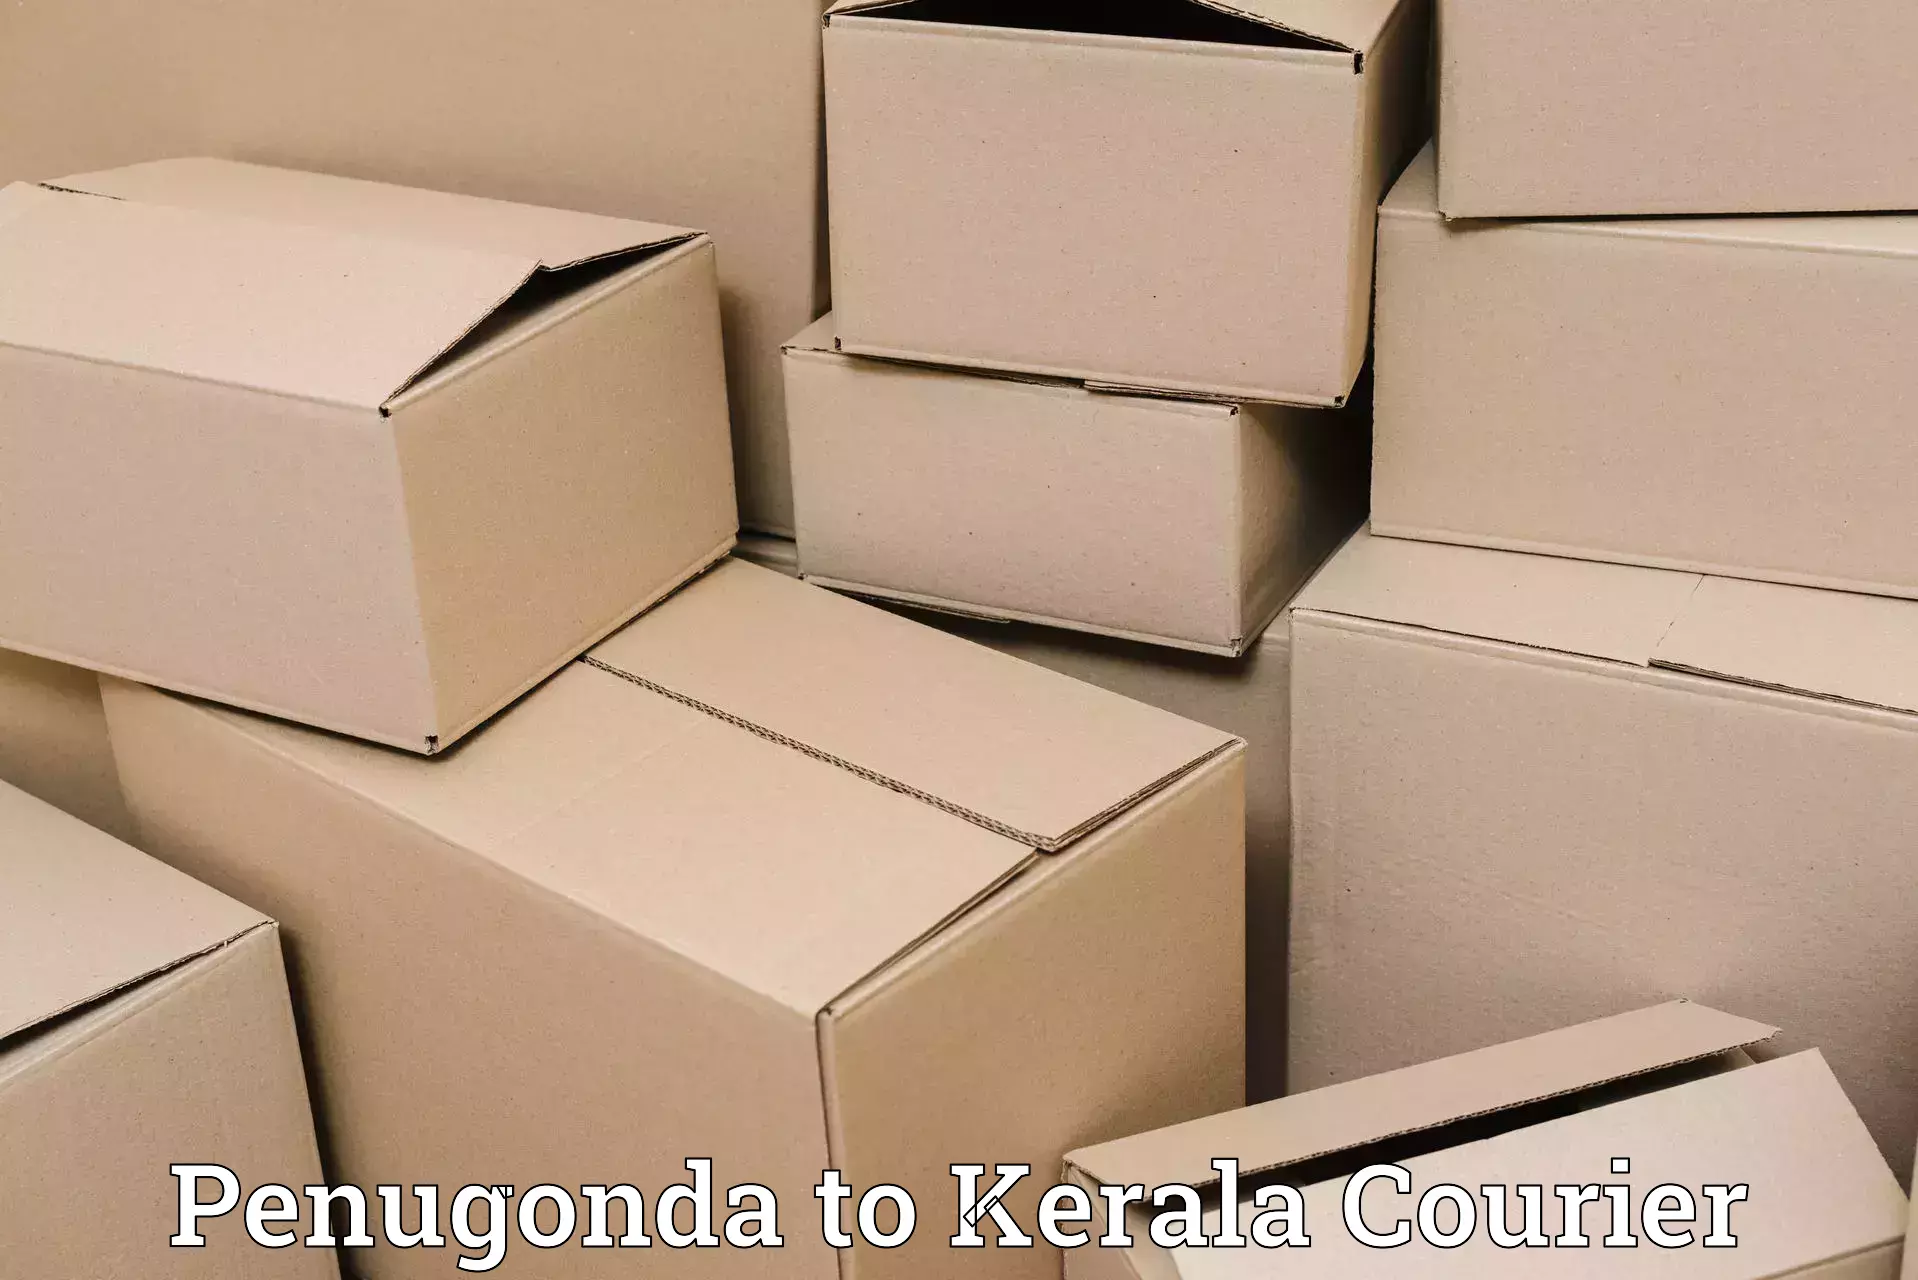 24-hour delivery options Penugonda to Palakkad